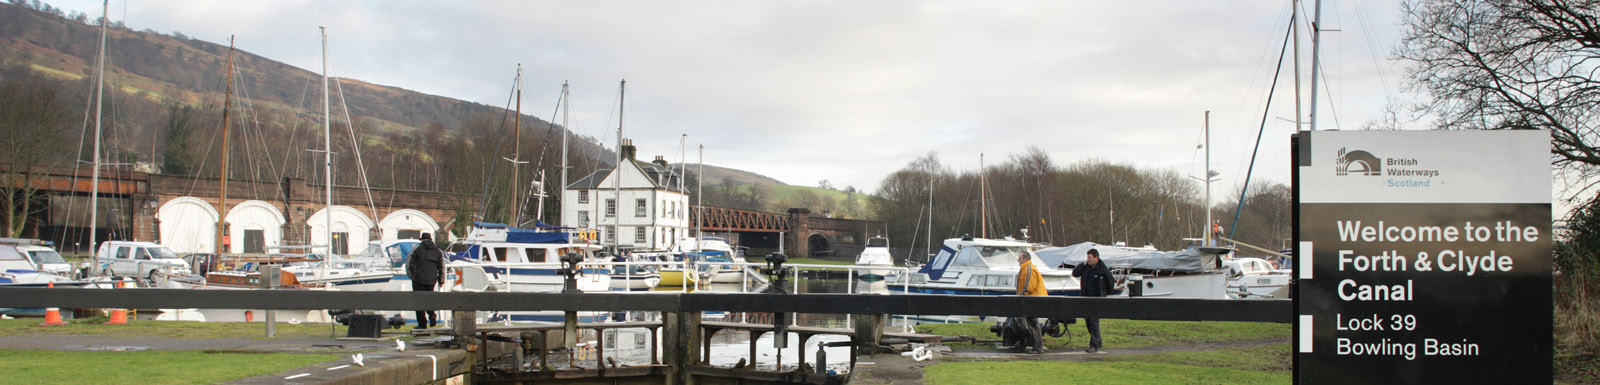 The last lock on the Forth and Clyde Canal at Bowling